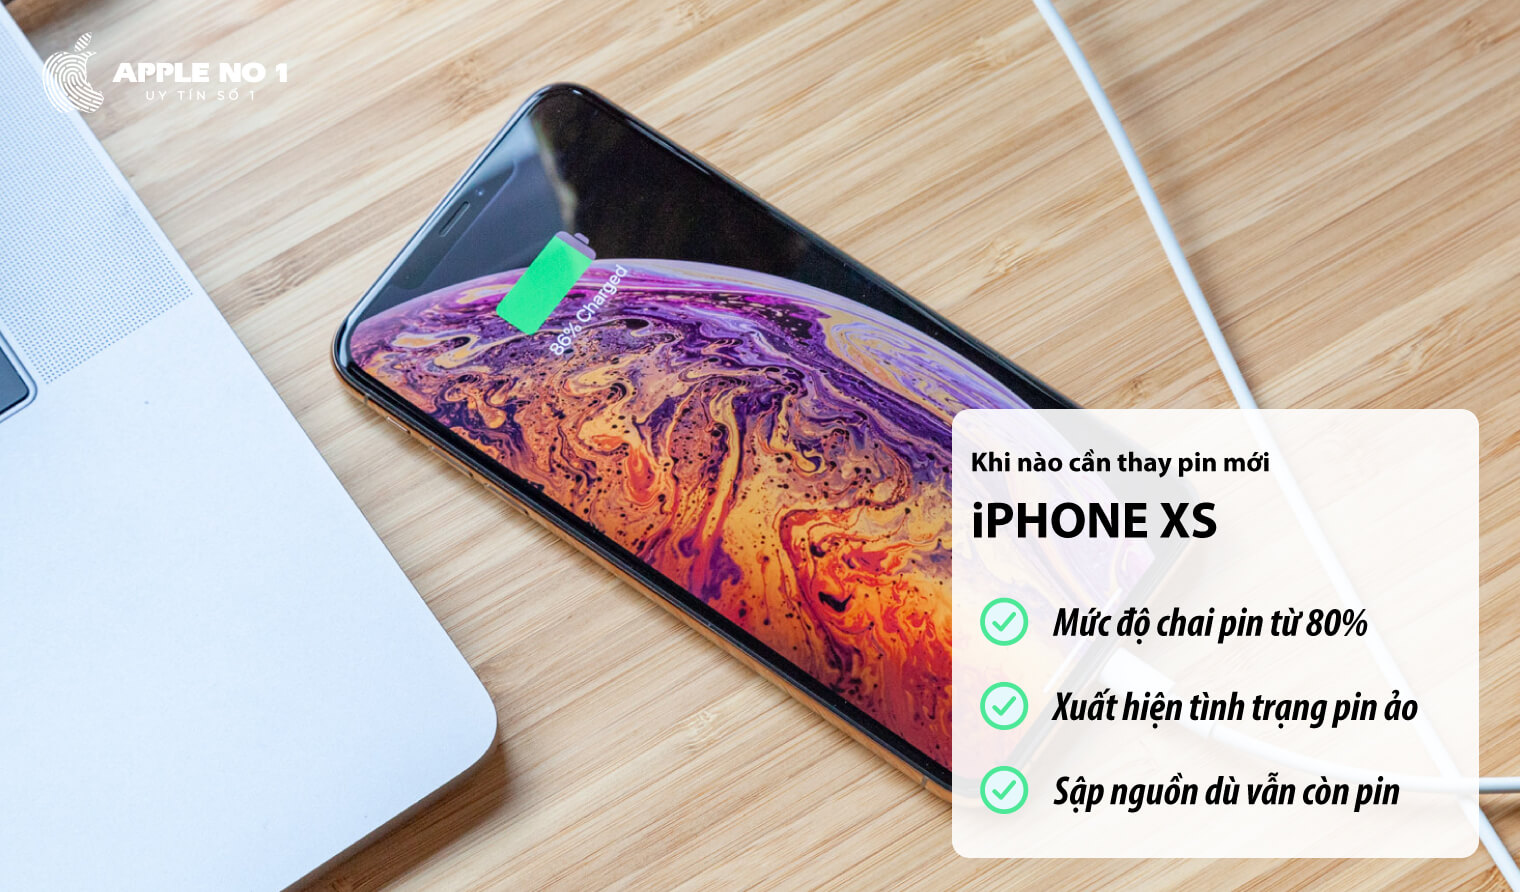 khi nao can thay pin iphone xs?